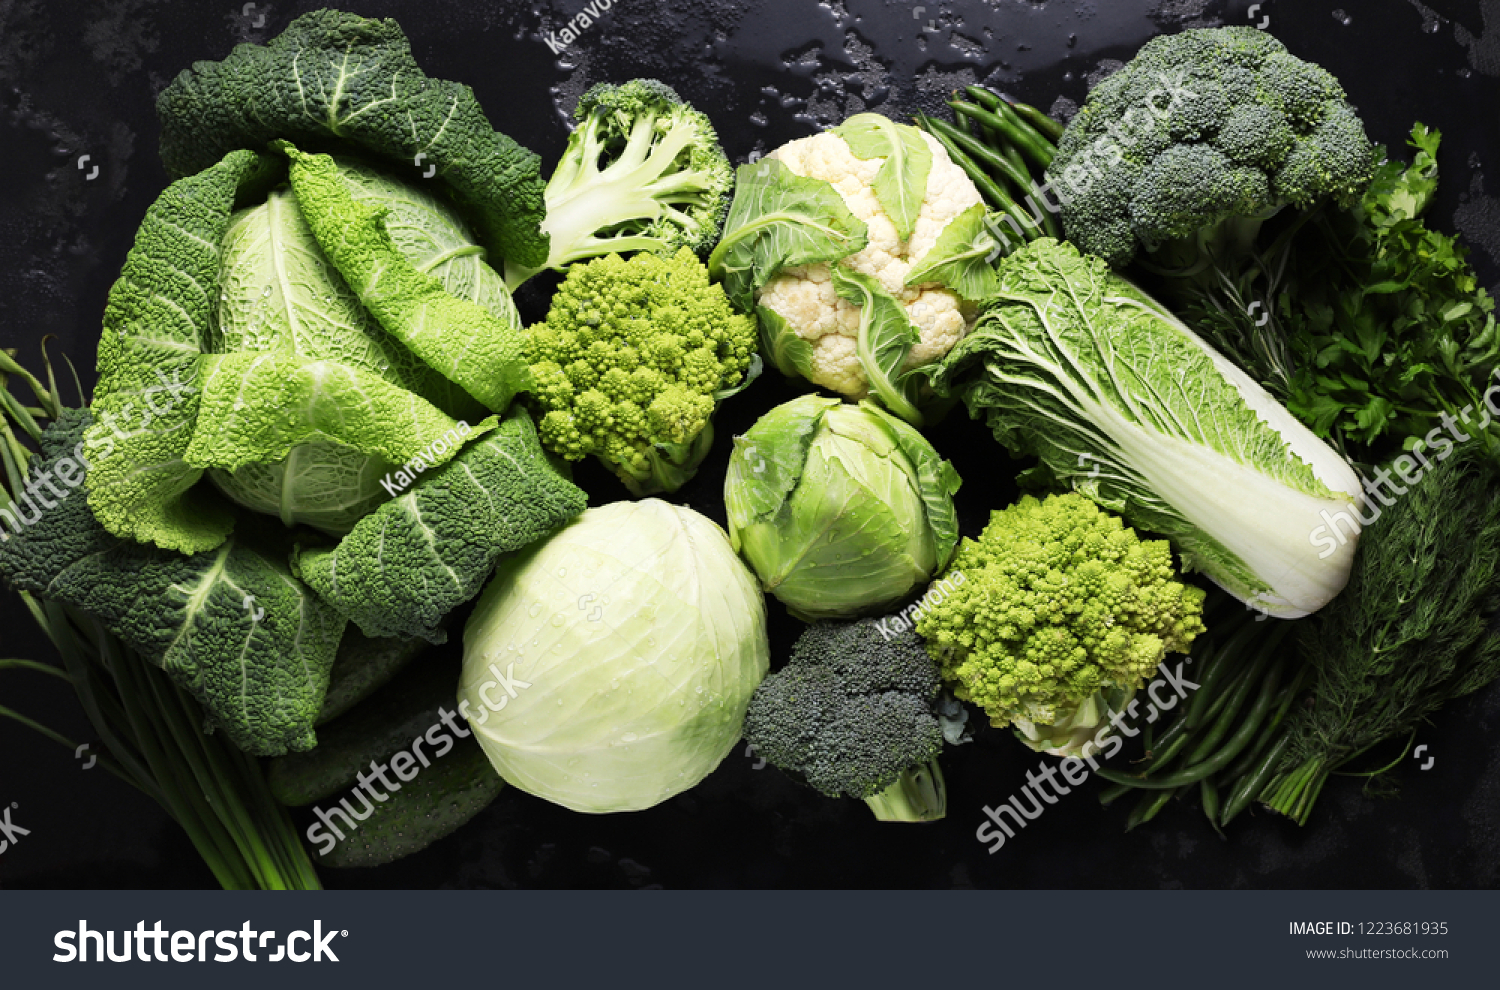 Different kinds of cabbage background in black table. Green vegetables. Broccoli, Savoy cabbage, White cabbage, cauliflower, Peking cabbage. Cucumbers, asparagus, herbs. Healthy diet food. #1223681935